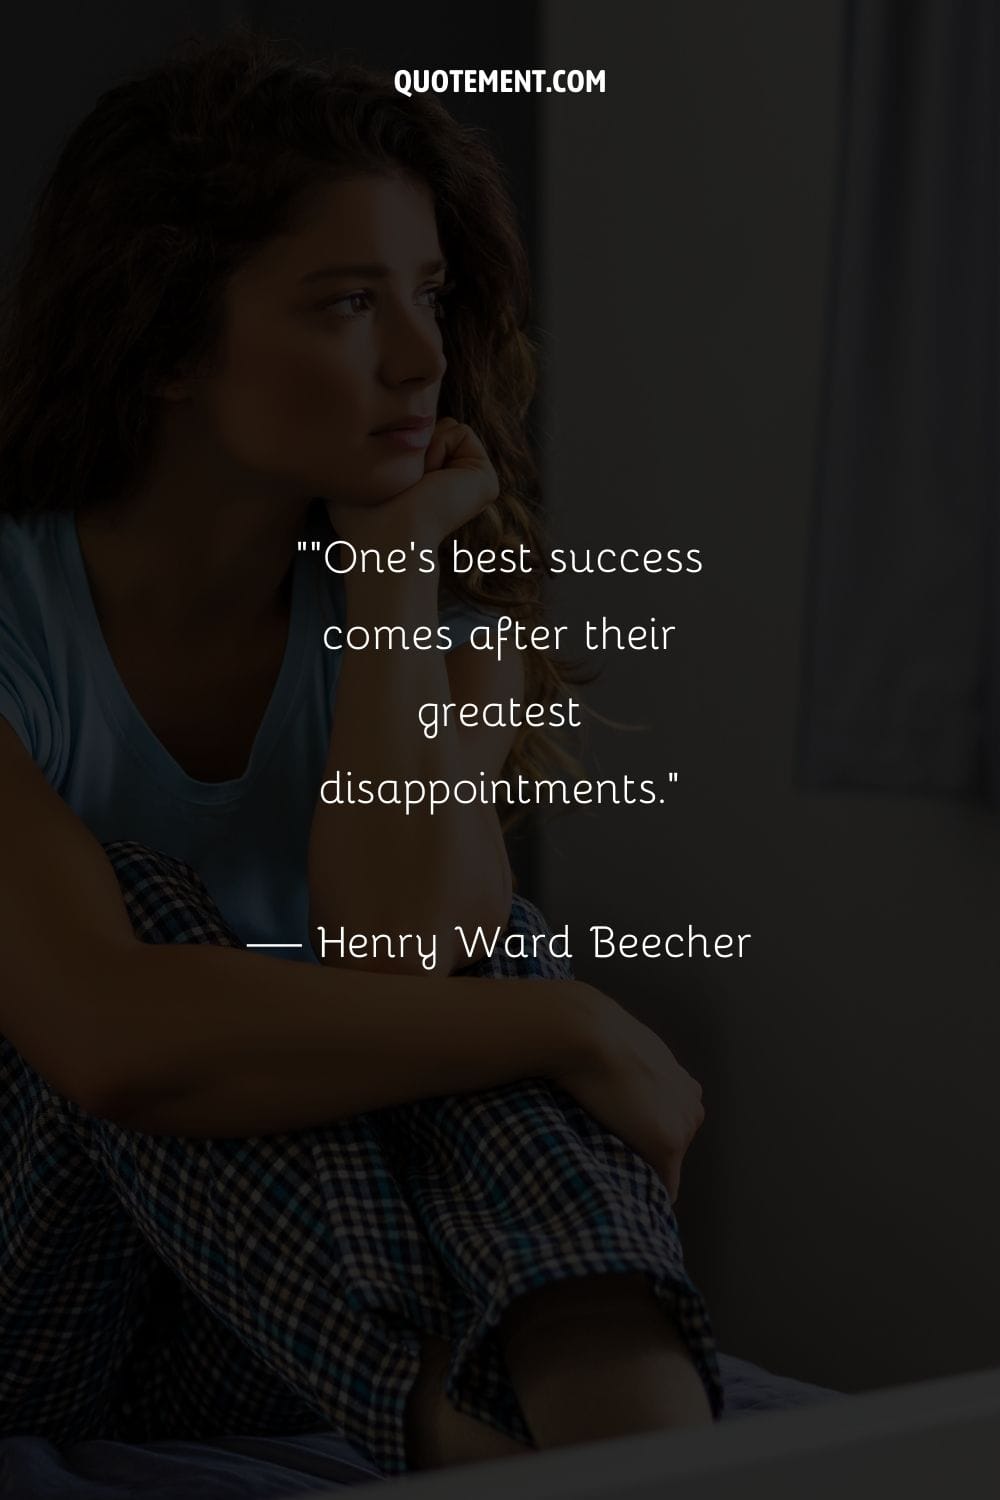 One’s best success comes after their greatest disappointments